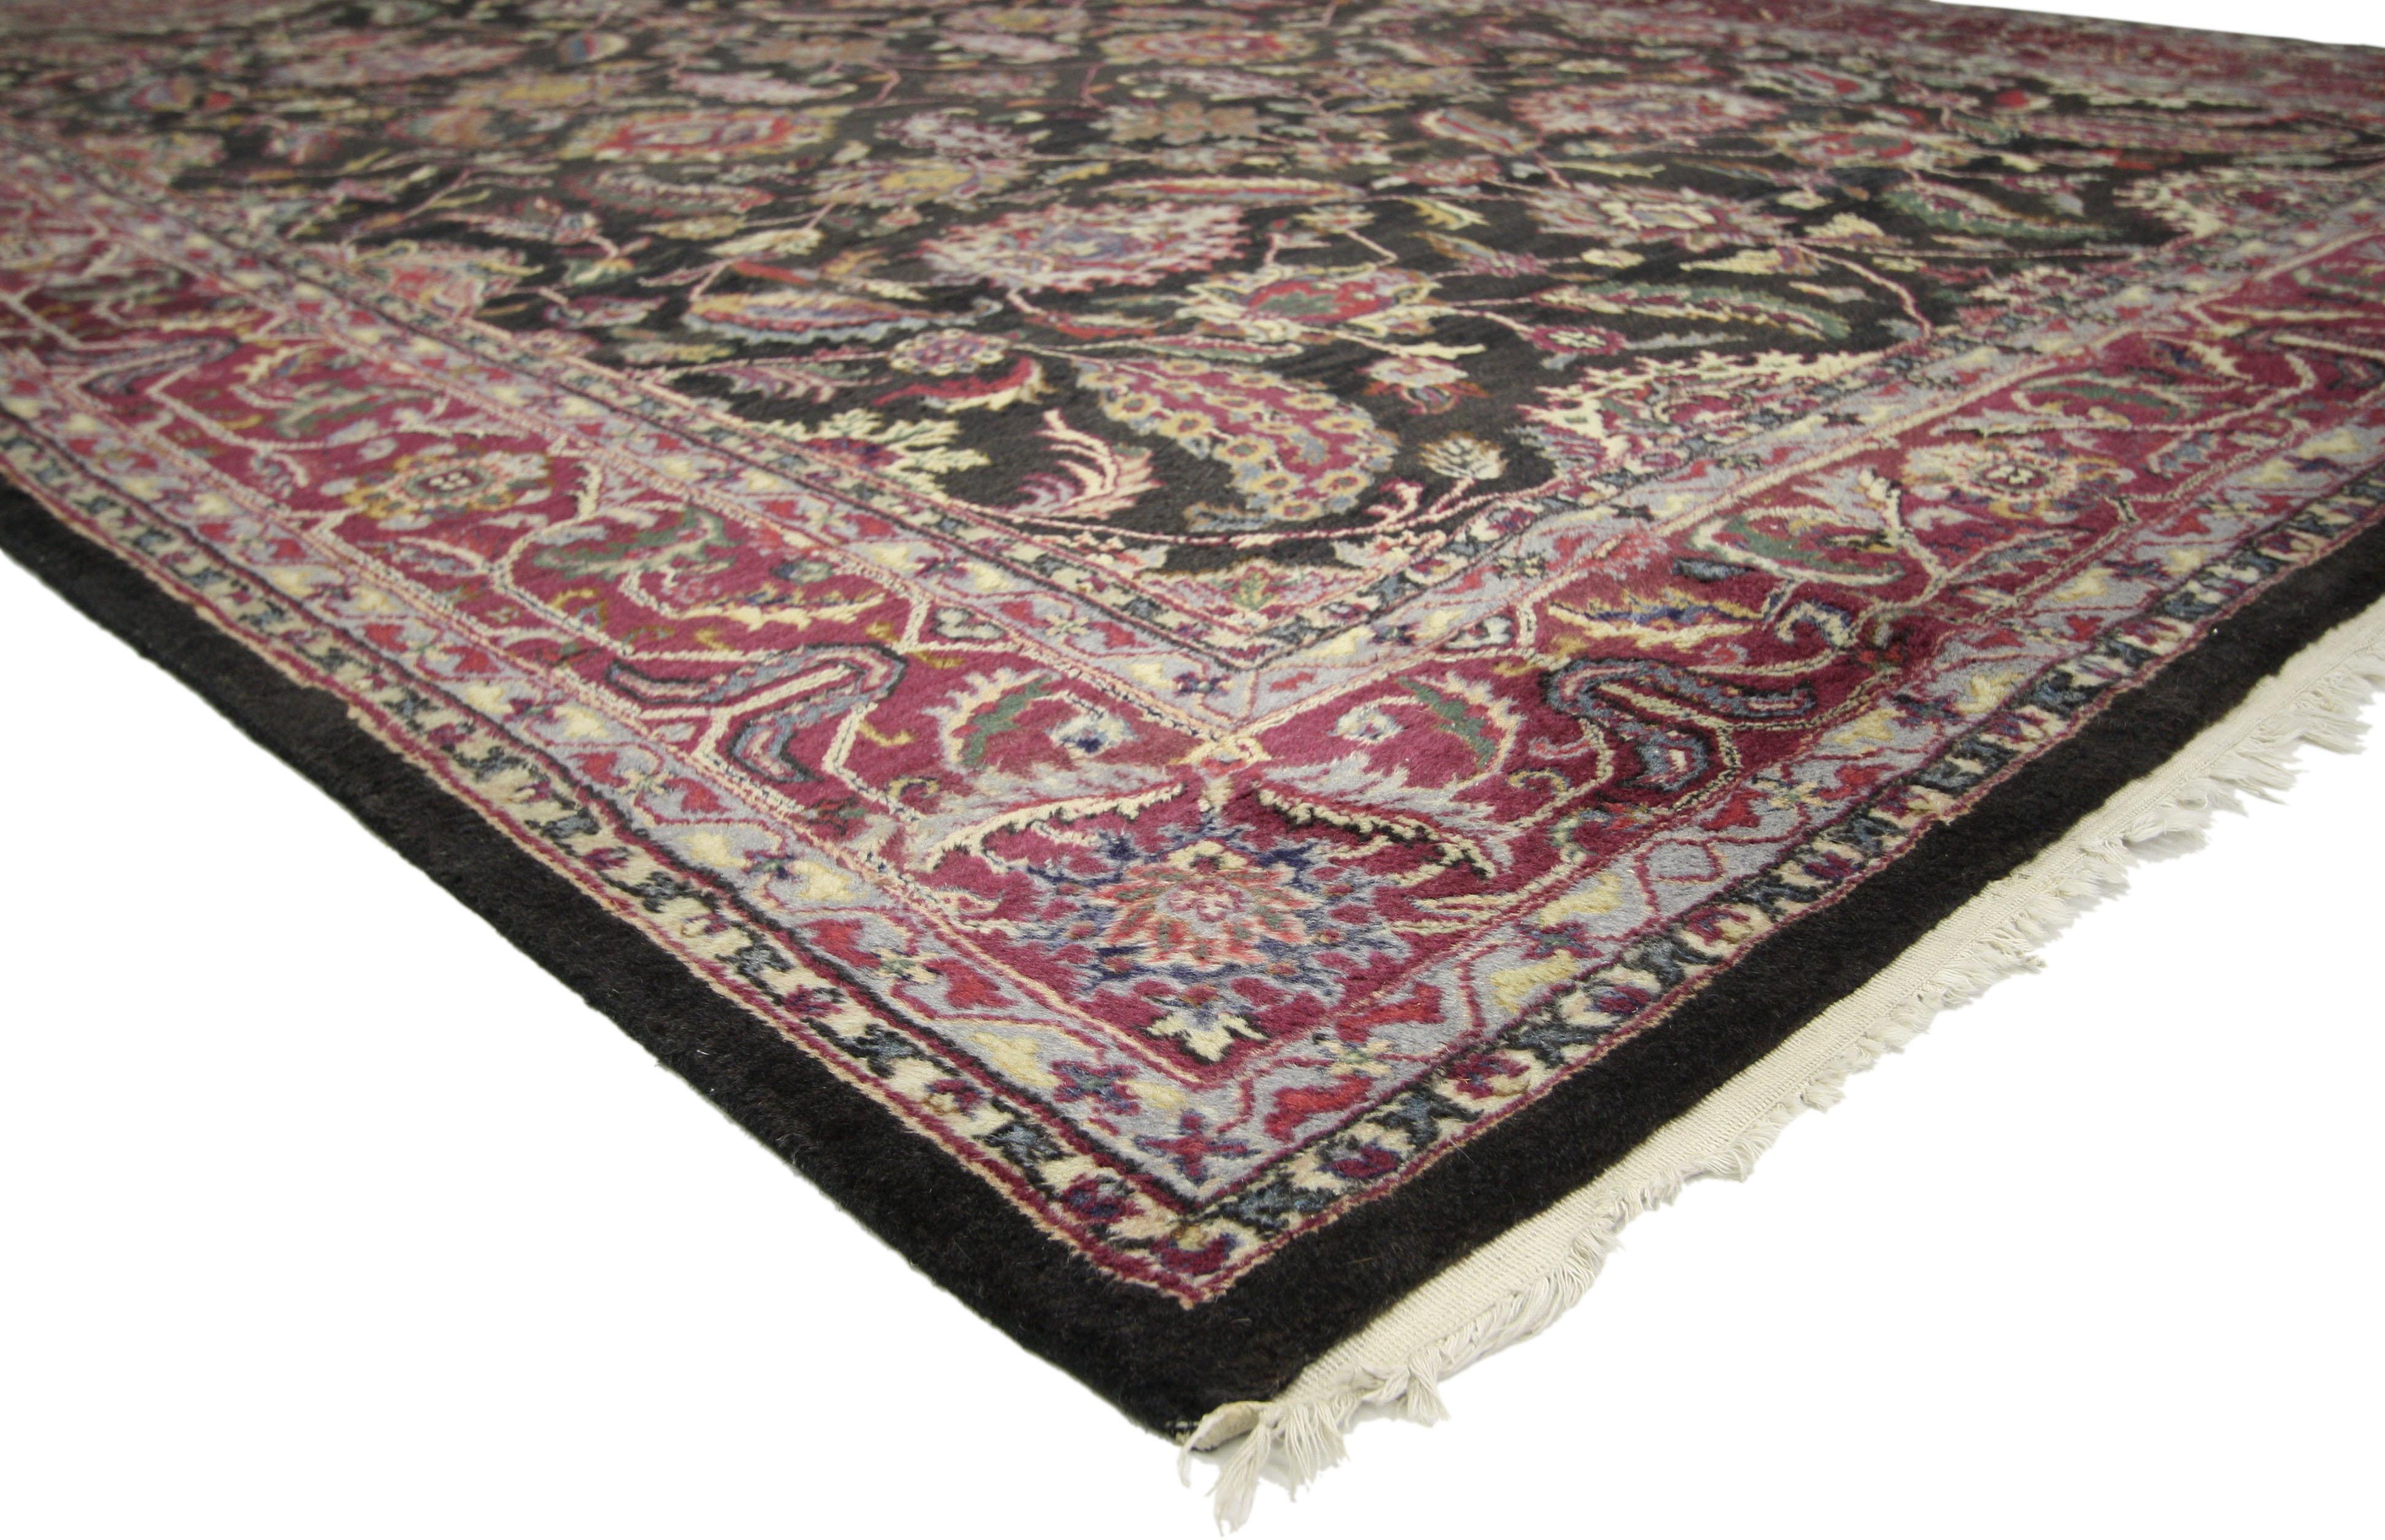 76700, Vintage Indian Rug with Traditional Persian Style. With large scale ornate details adding timeless elegance and a sense of history, this hand-knotted wool vintage traditional Indian area rug features a lively all-over floral pattern composed